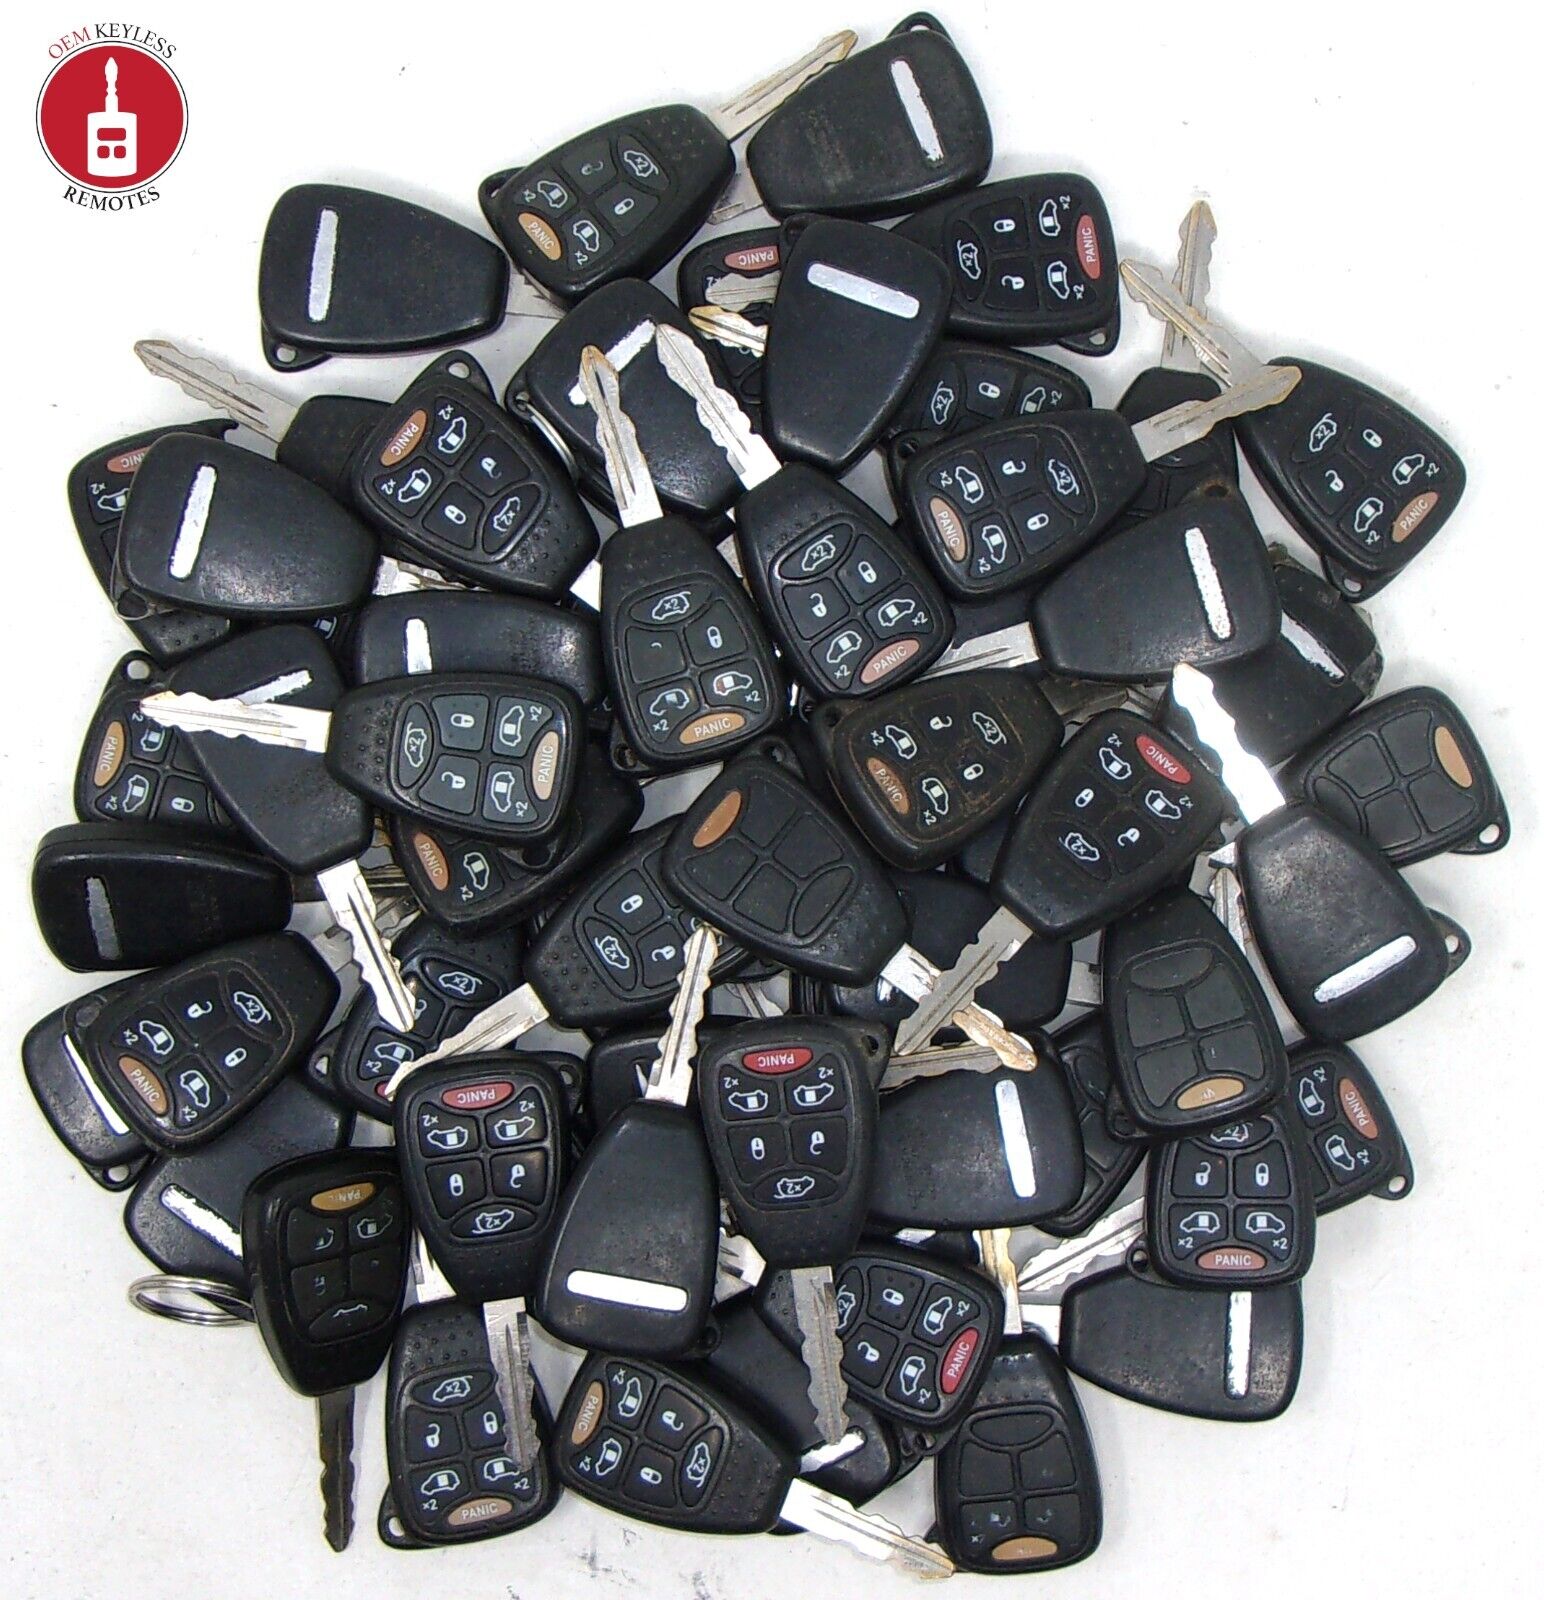 OEM Lot of 62 Chrysler/Dodge Remote Head Key Combos 6 Button -Used- M3N5WY72XX